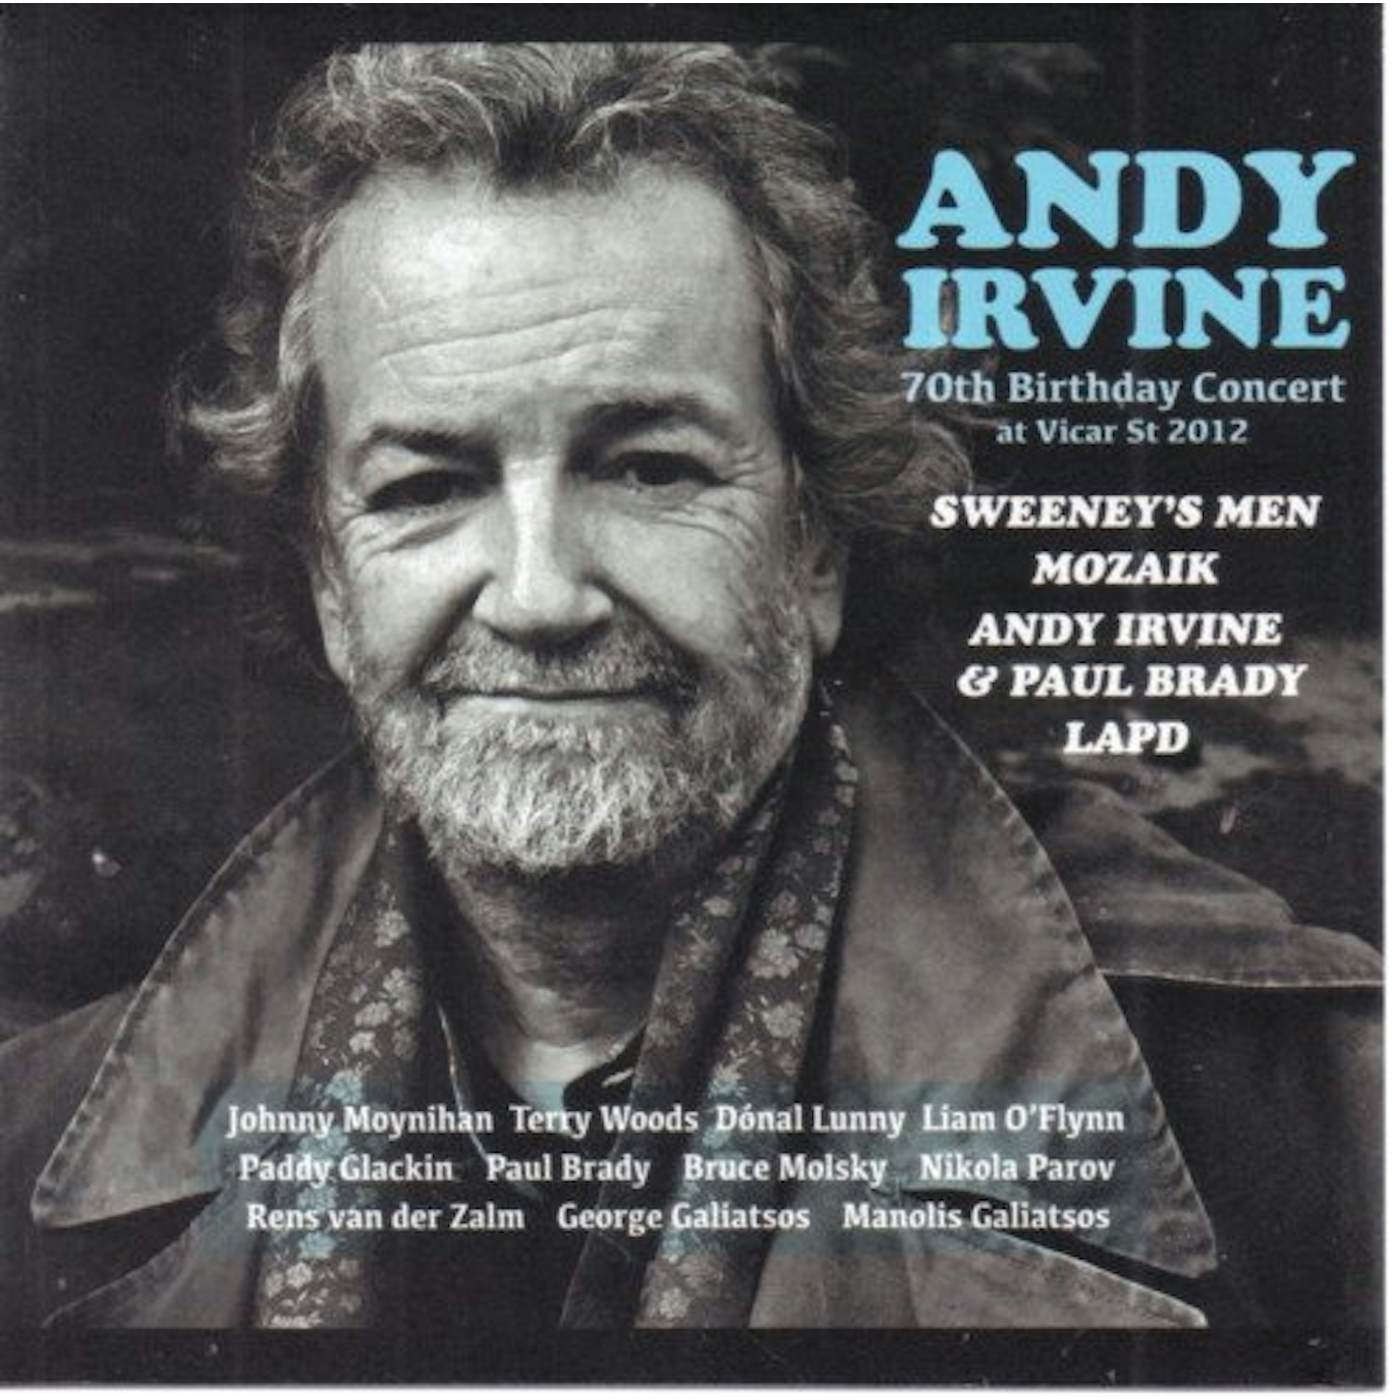 Andy Irvine 70TH BIRTHDAY CONCERT AT VICAR ST 2012 CD